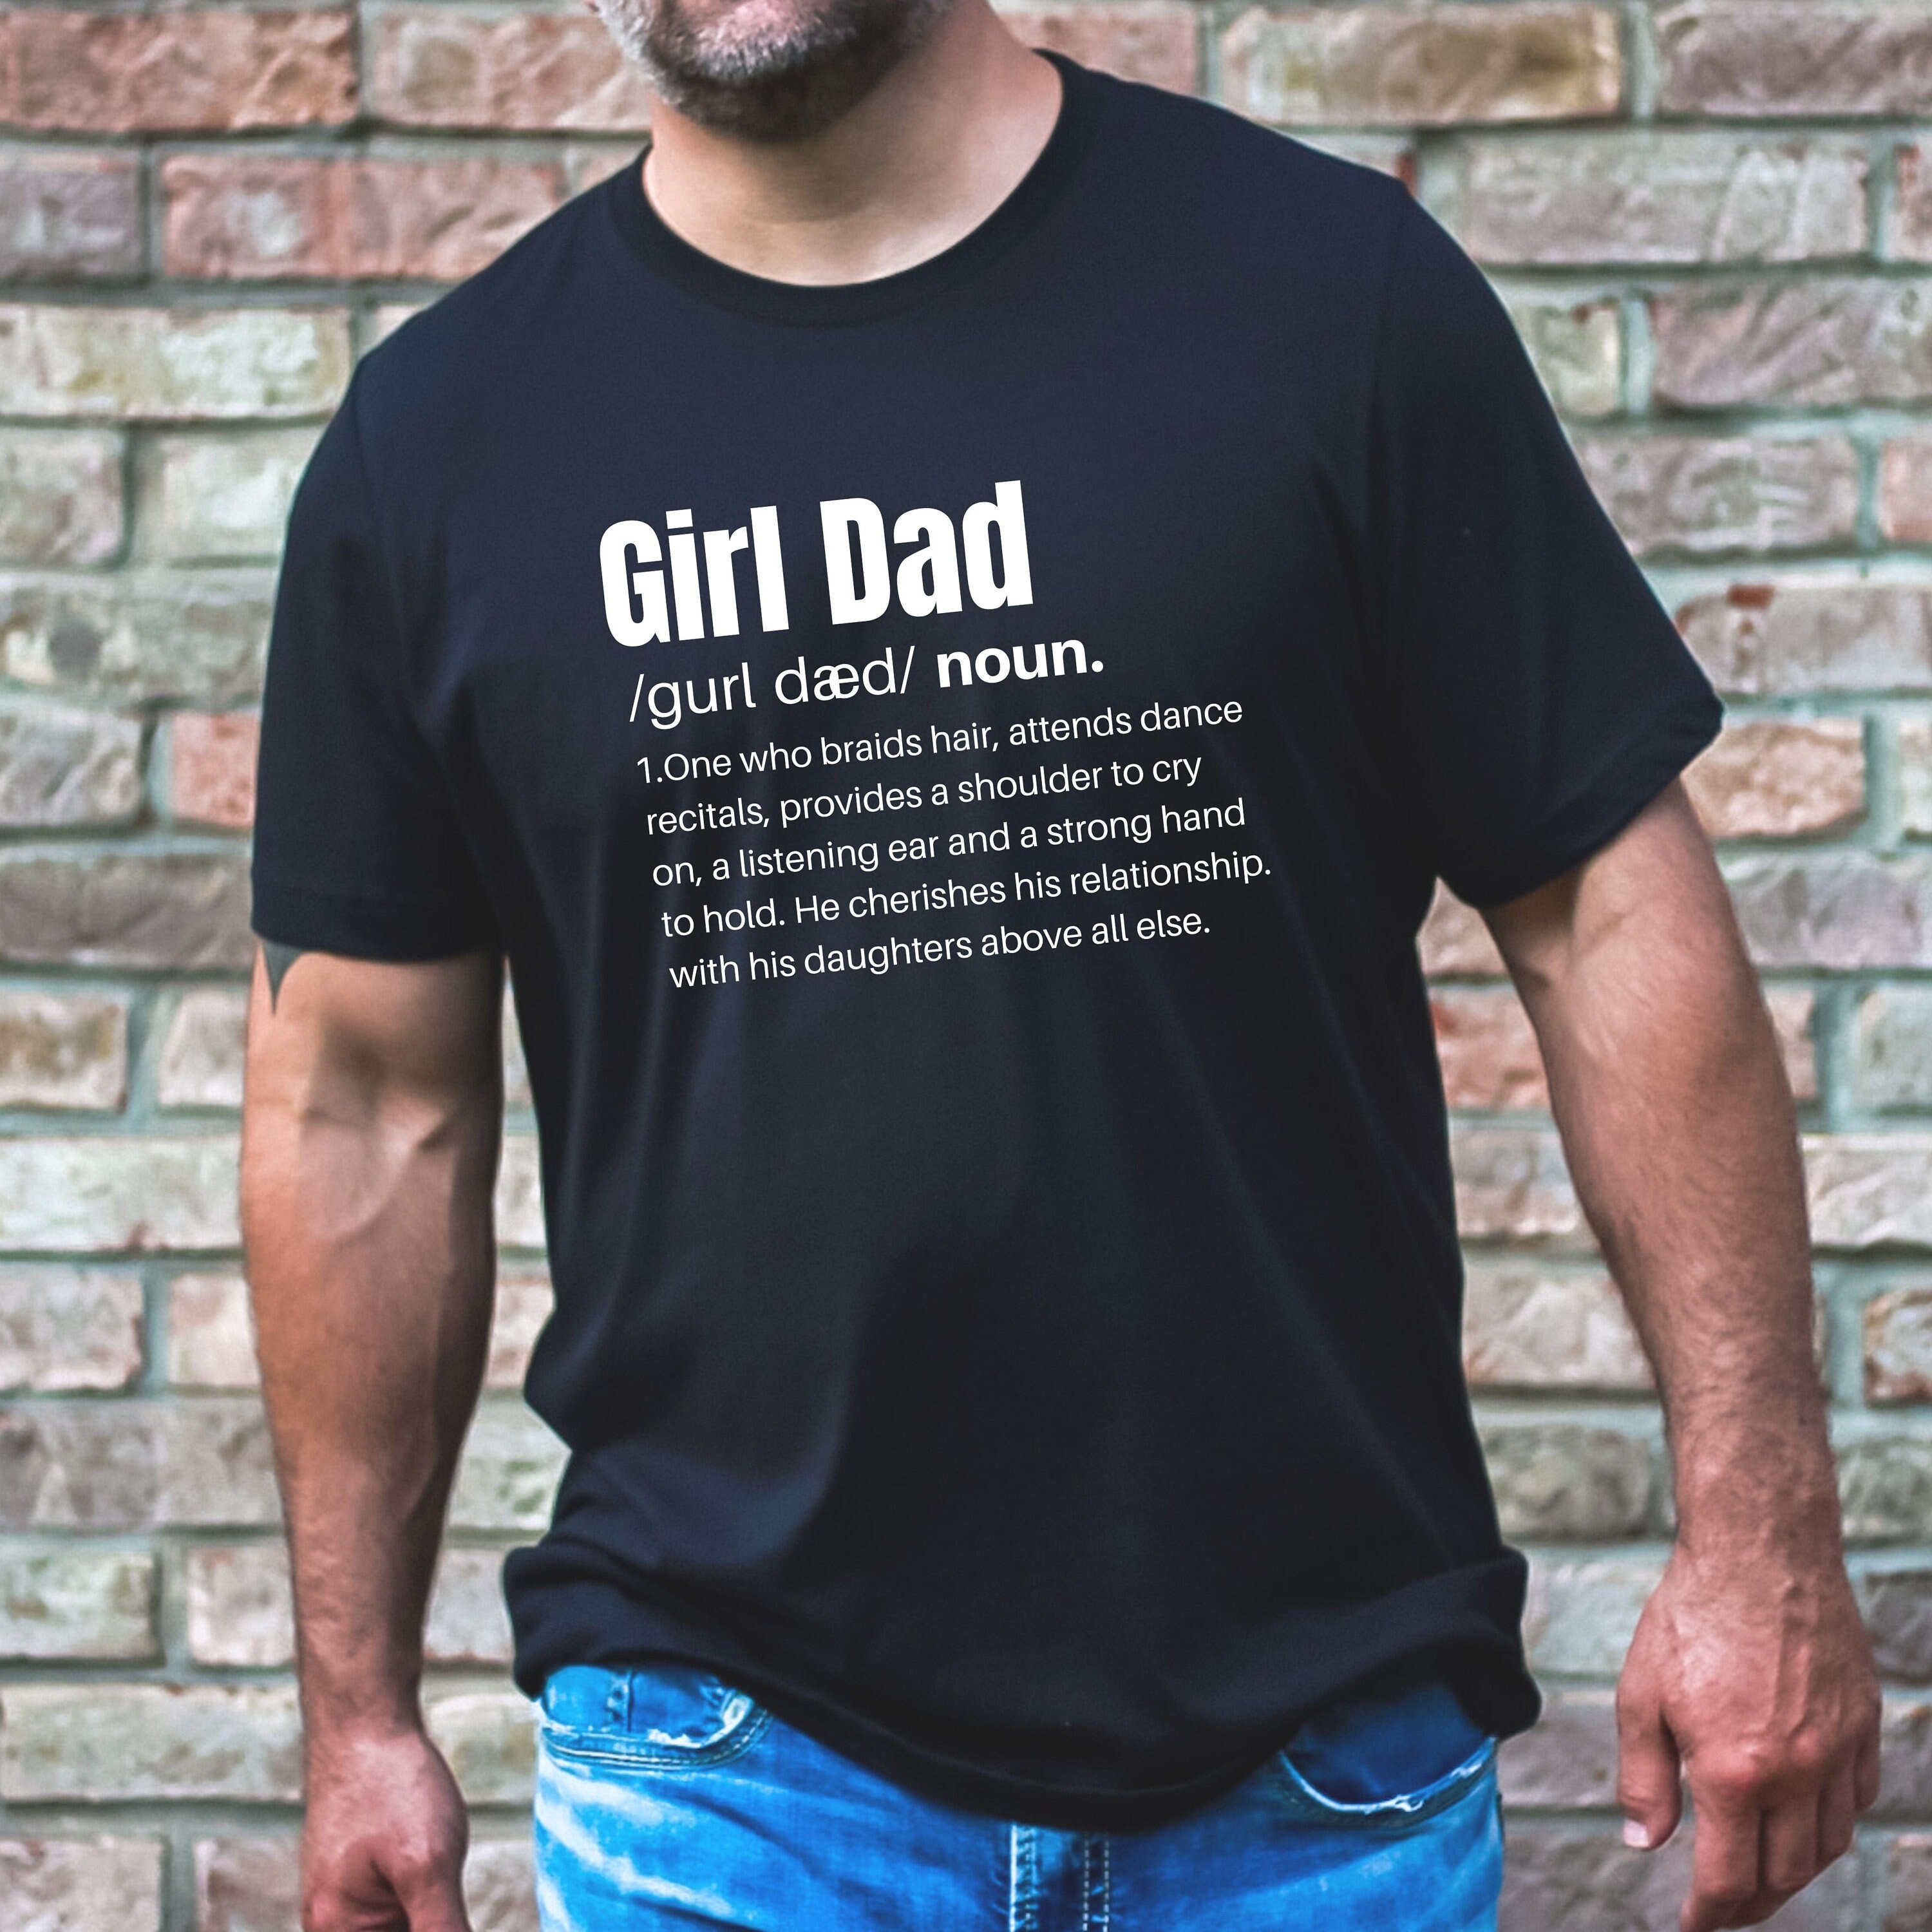 Girl Dad T-Shirt, Dad Of Daughter Shirt, Dad Nutrition Facts Shirt, Father's  Day Shirt, Dad Jokes Gift, Funny Dad Tee - Printiment